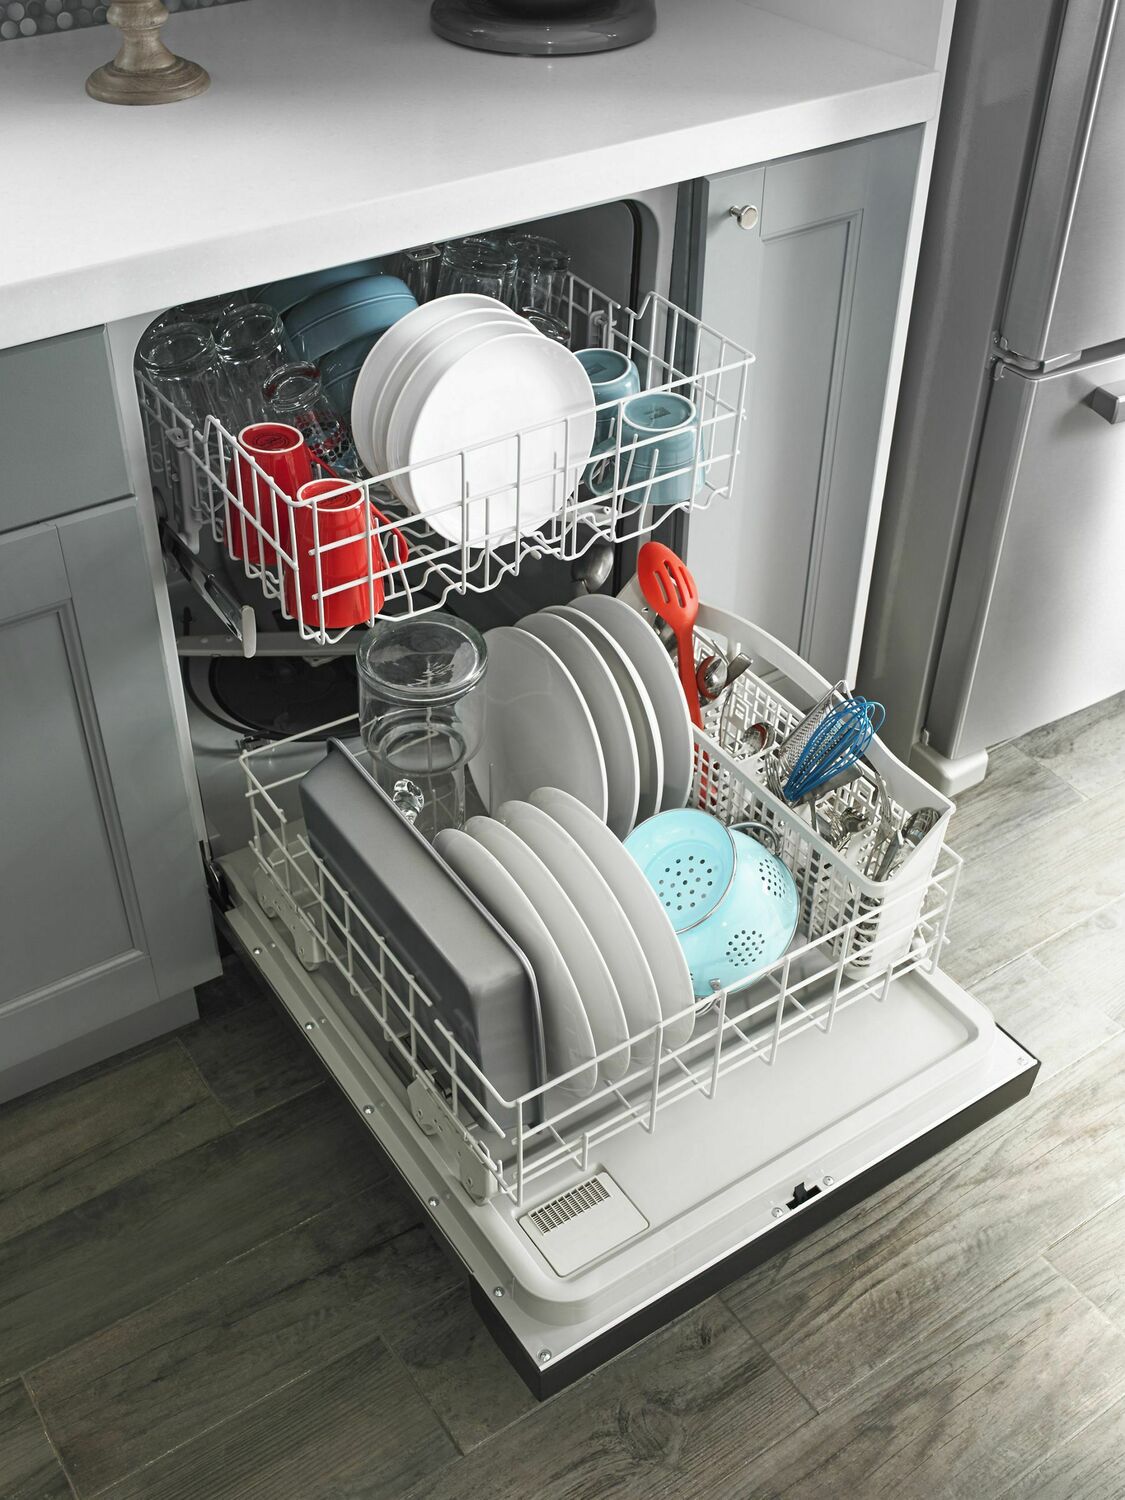 Amana ADB1400AGS Dishwasher With Triple Filter Wash System - Stainless Steel